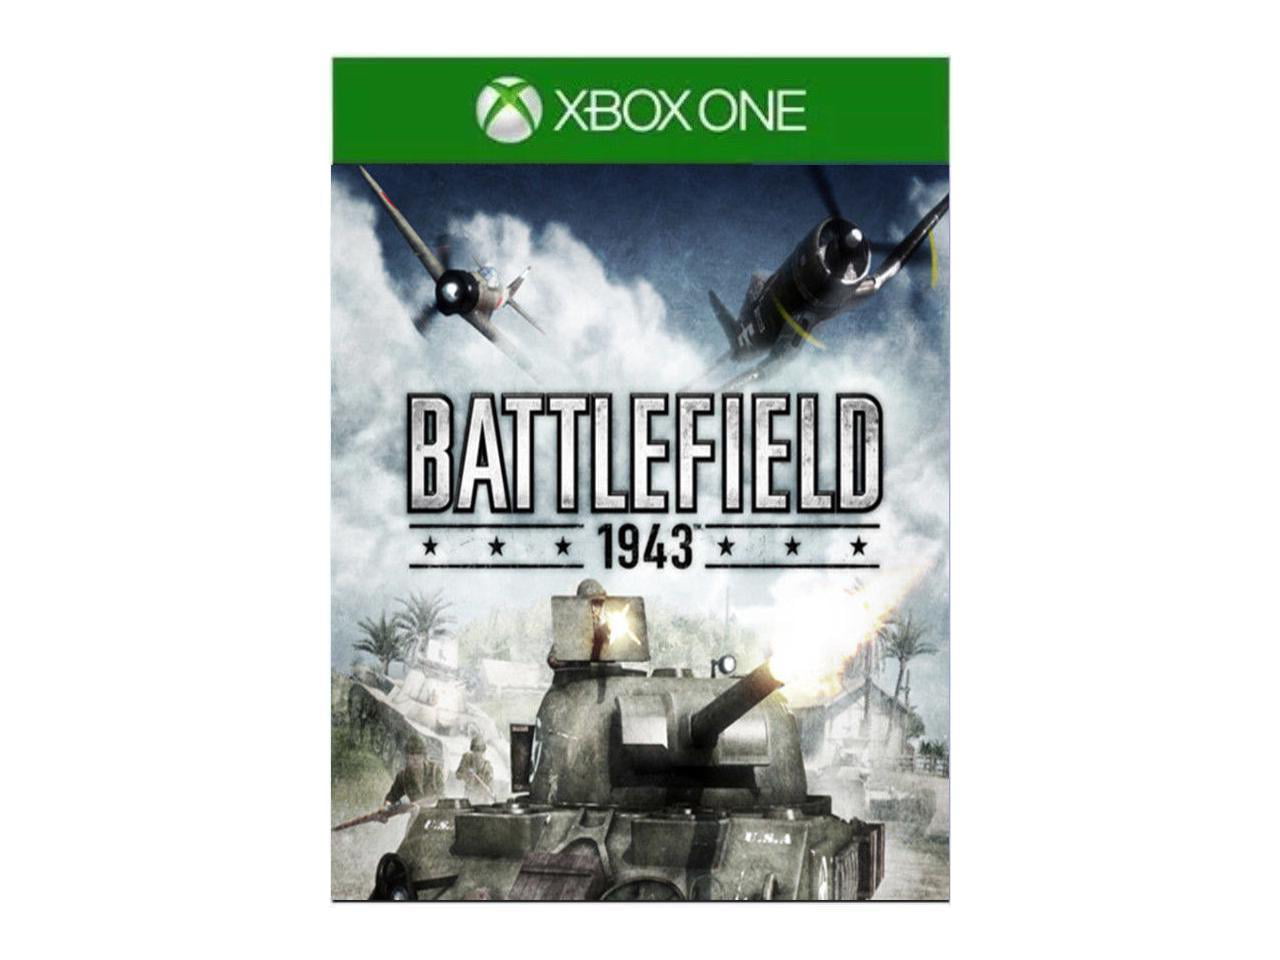 clearance xbox one games